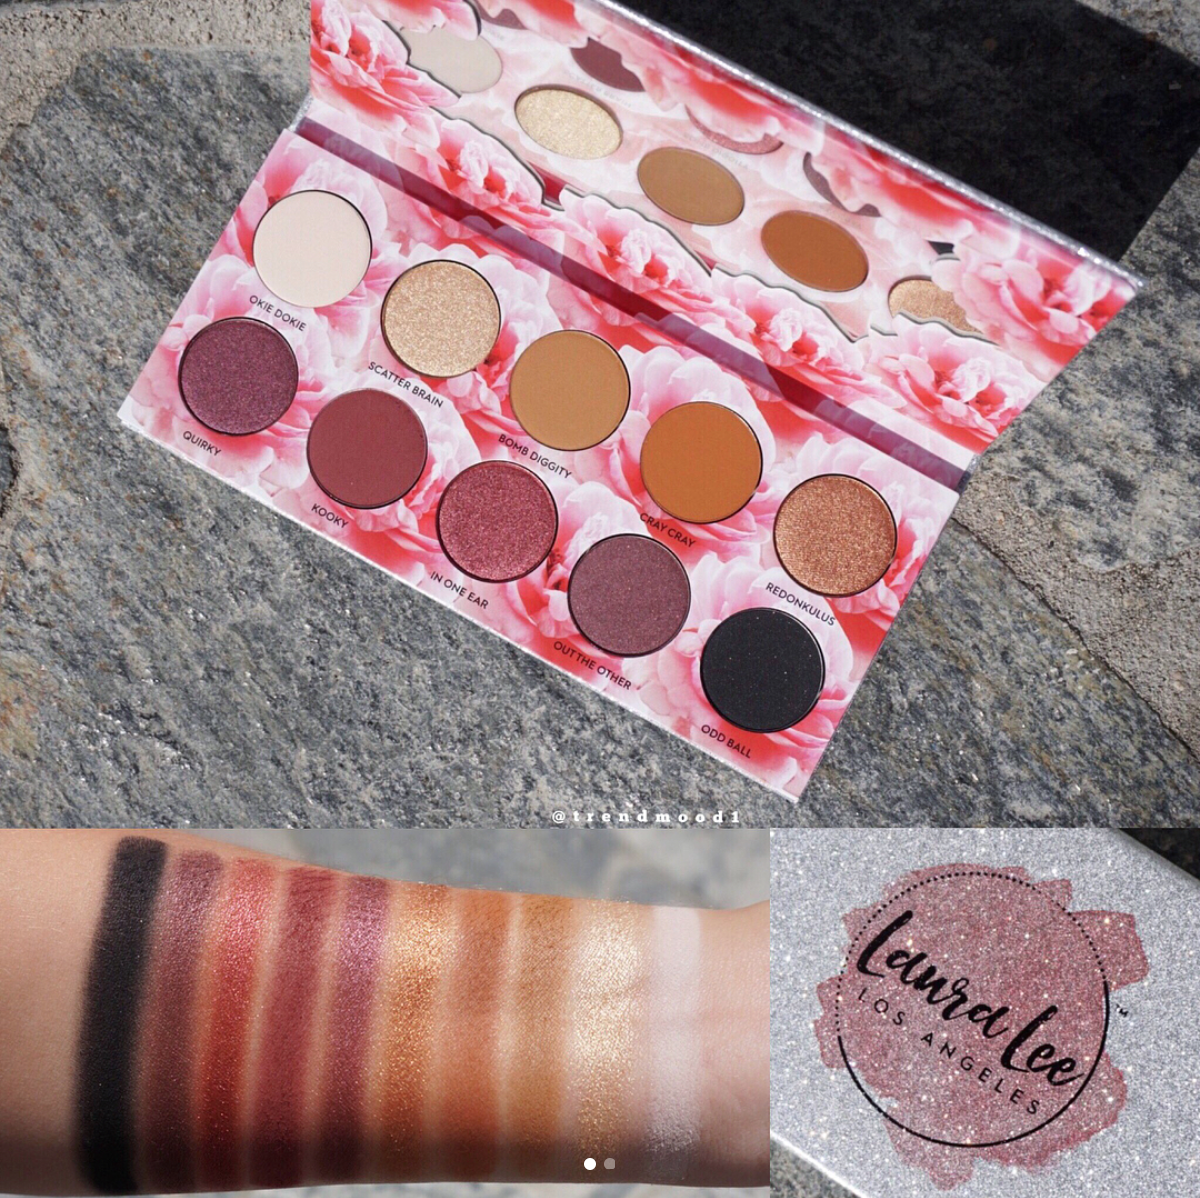 Laura Lee Los Angeles Cats Pajamas Eyeshadow Palette swatches and release date